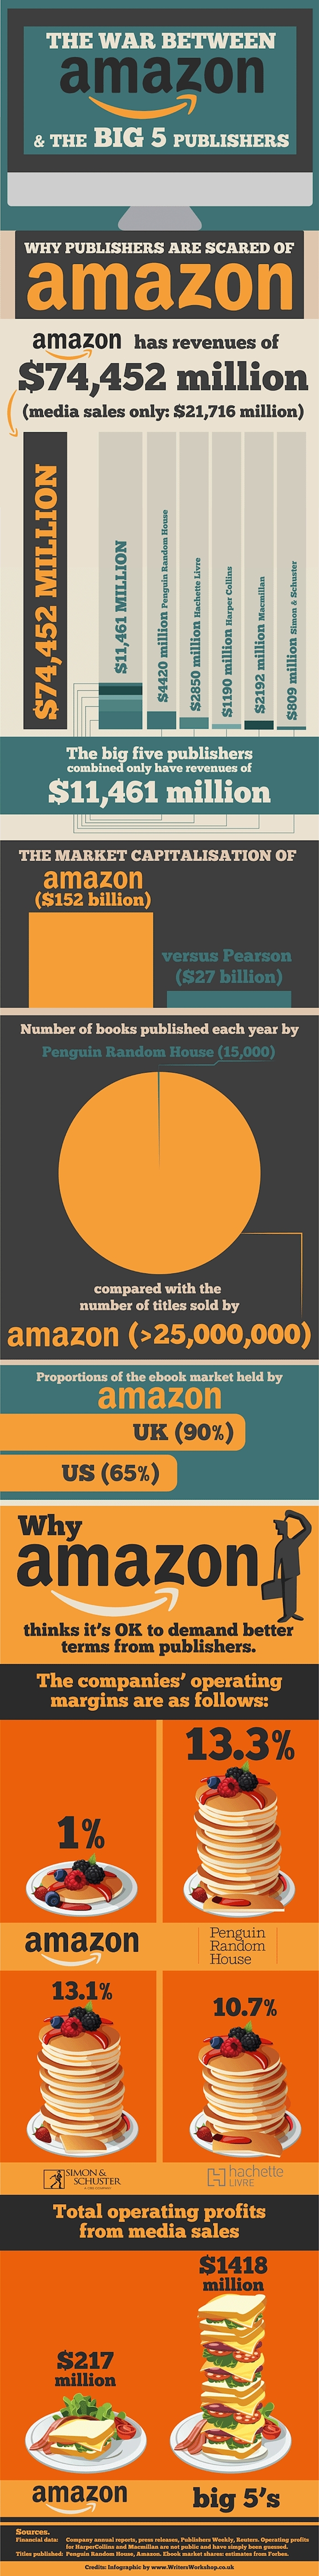 The-war-between-Amazon-and-the-biggest-publishers-infographic